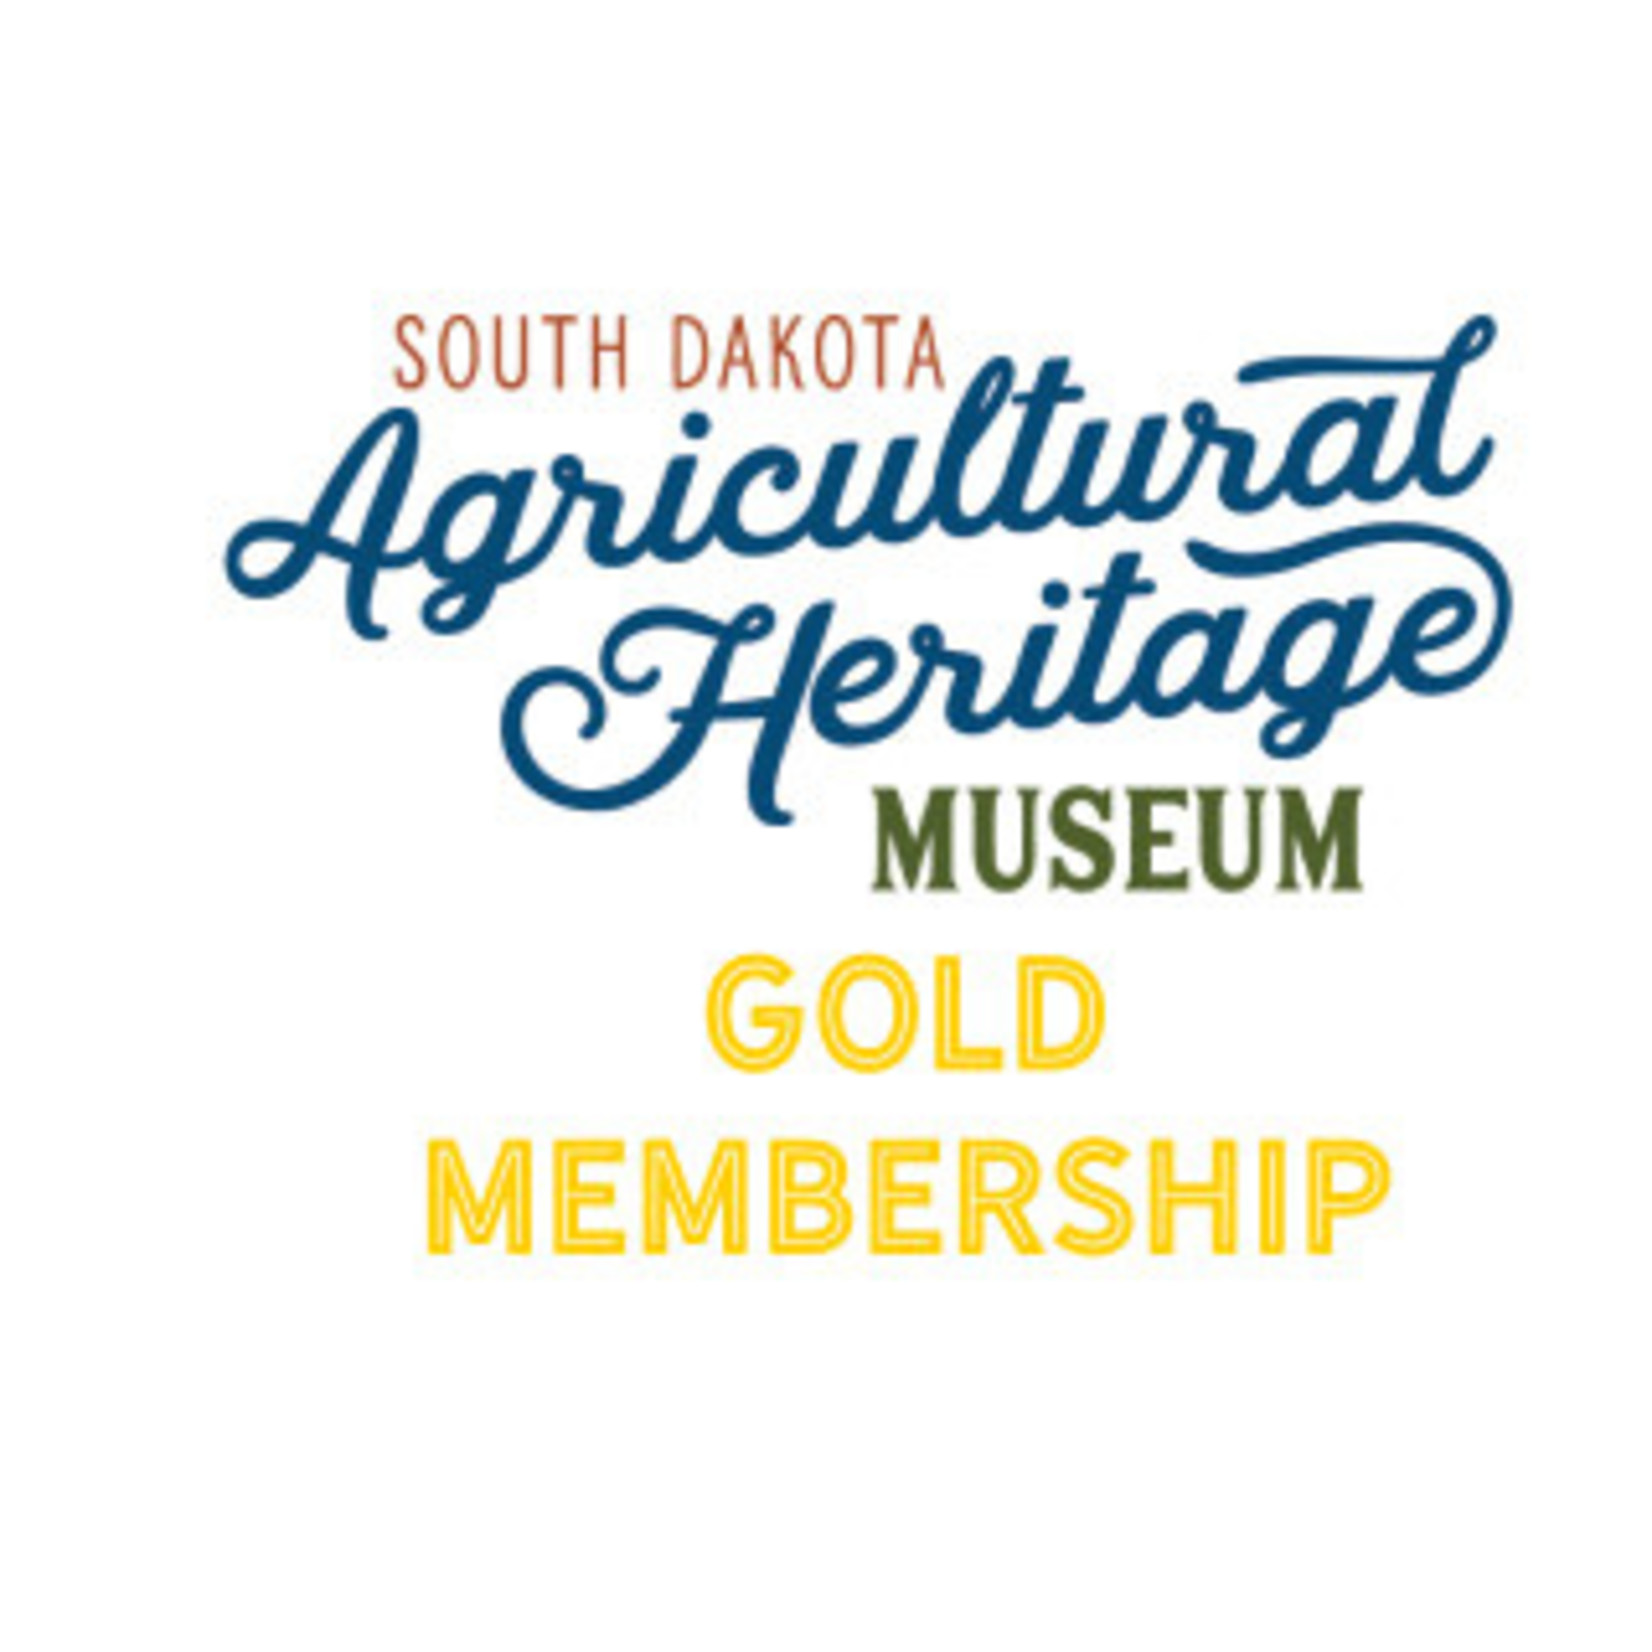 SD Agricultural Heritage Museum Gold Membership